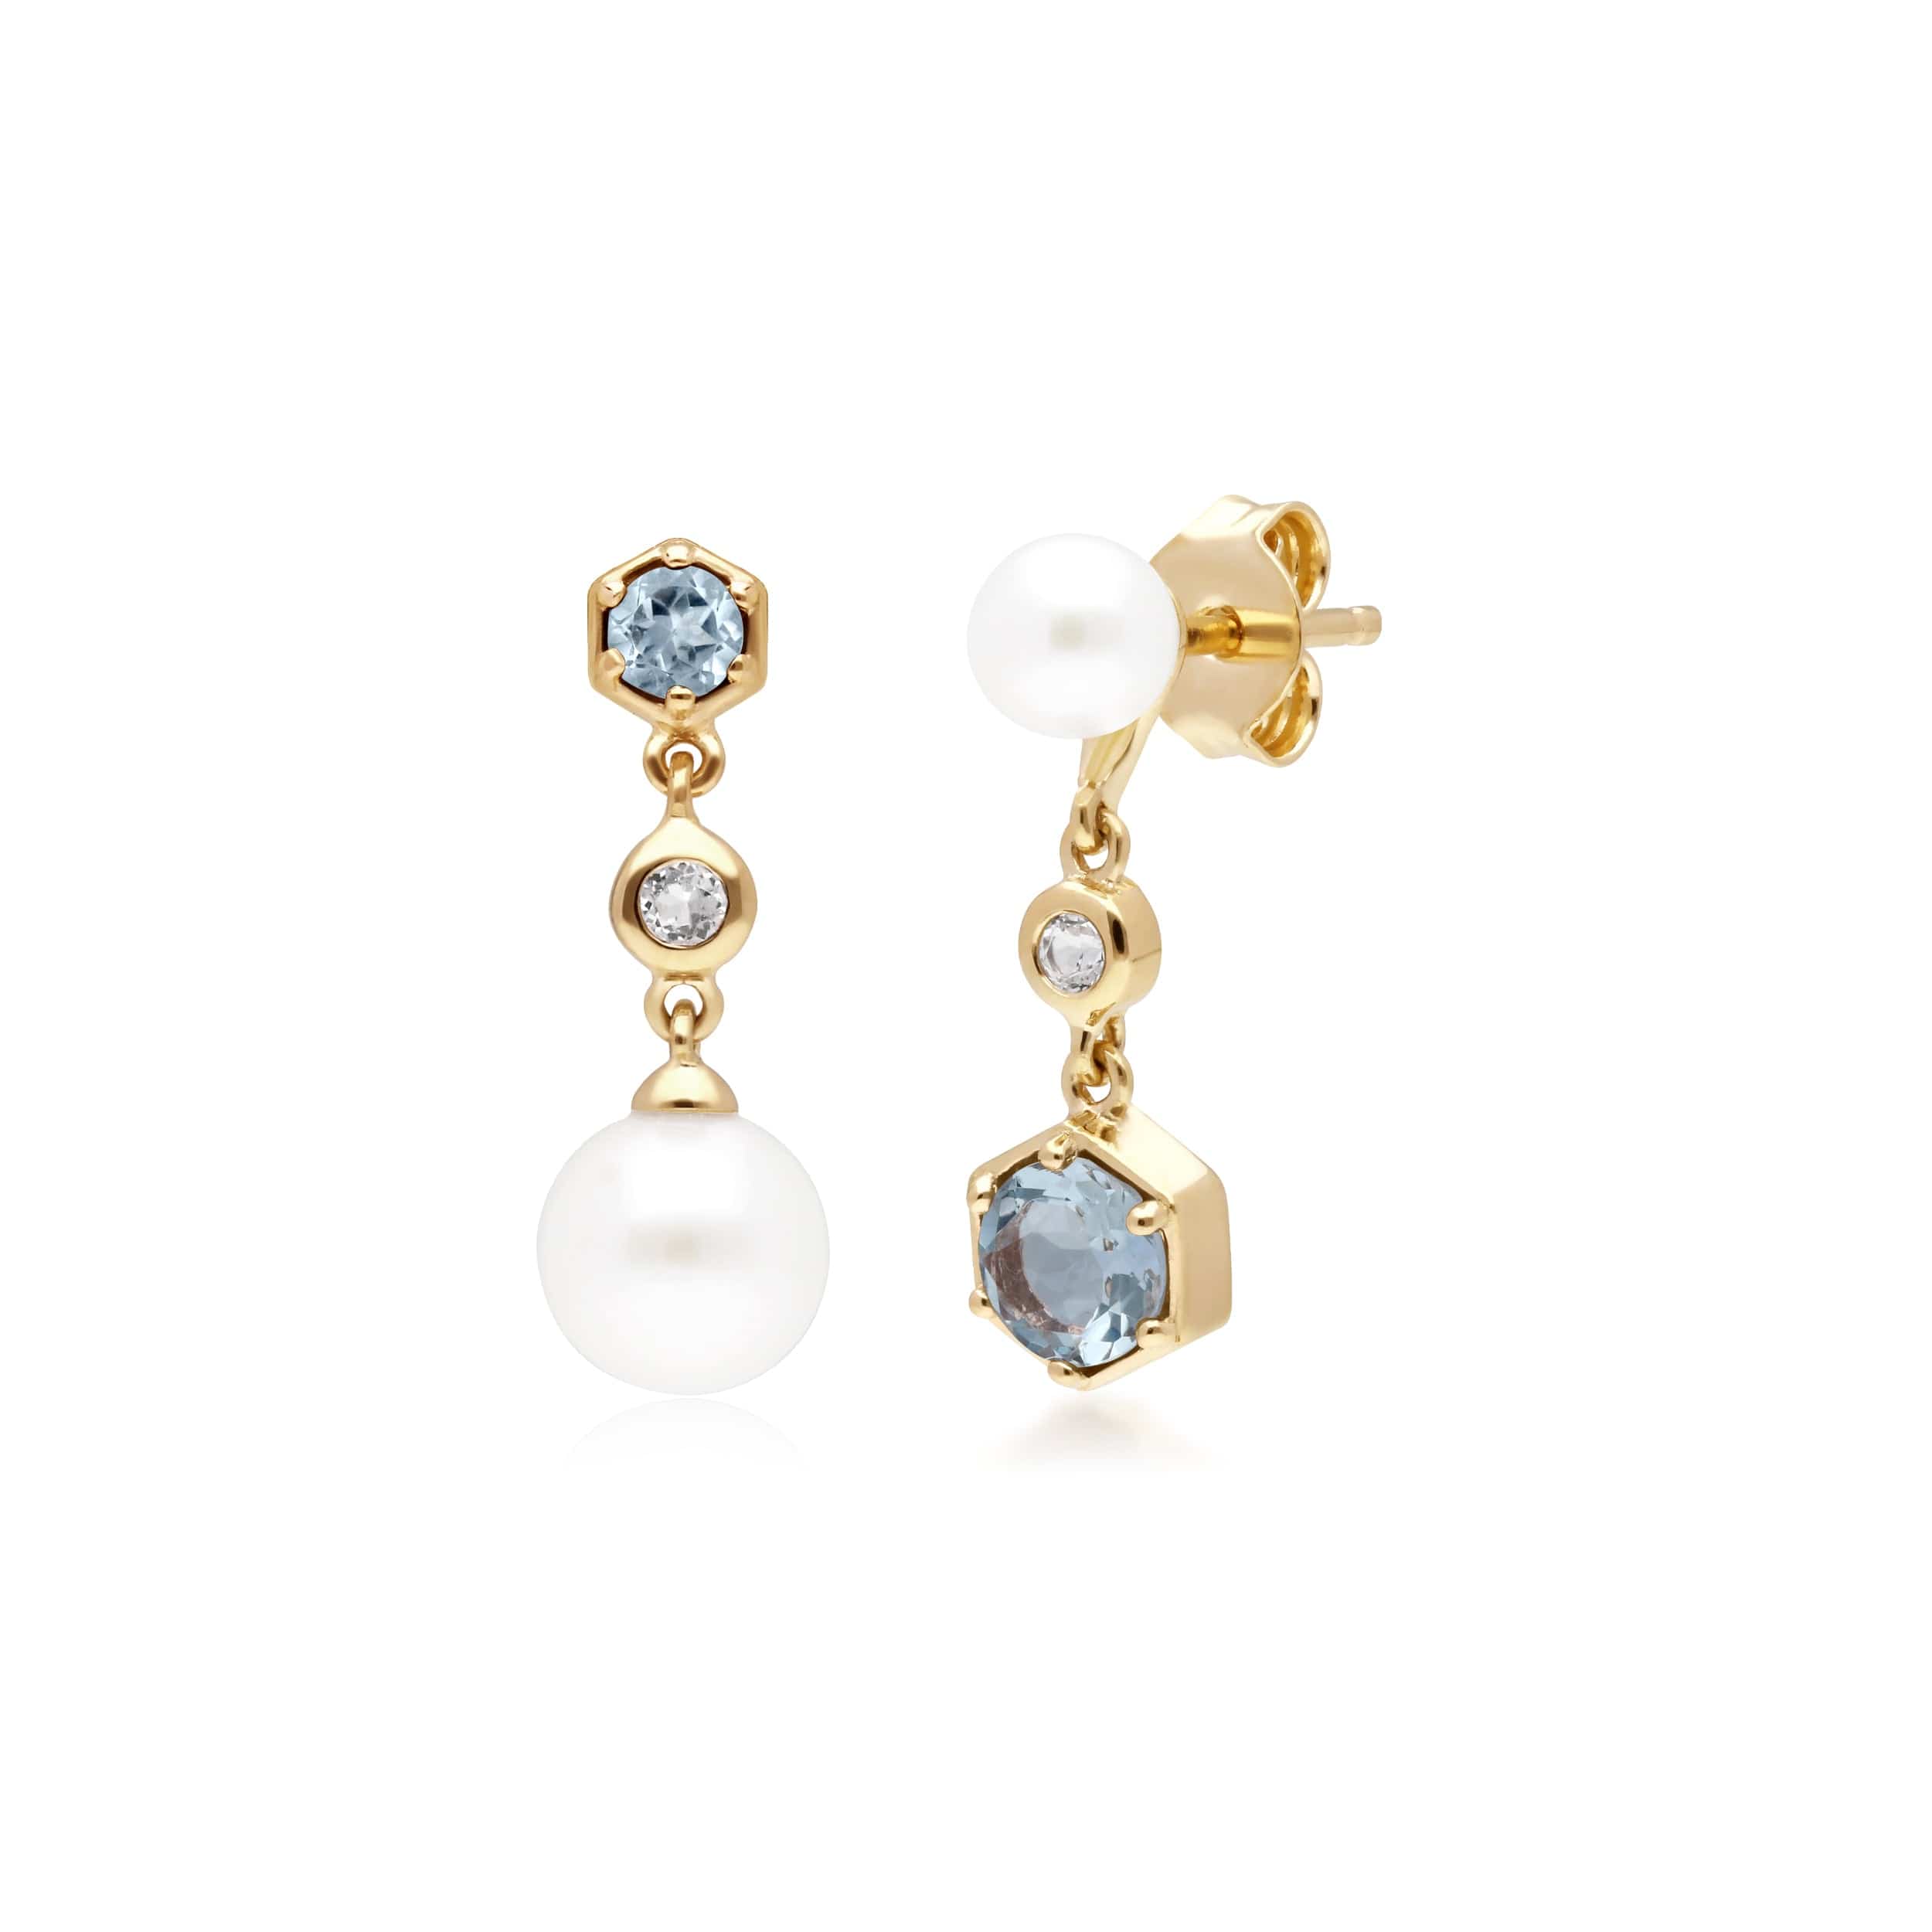 Modern Pearl, Aquamarine & Topaz Mismatched Drop Earrings in Gold Plated Silver